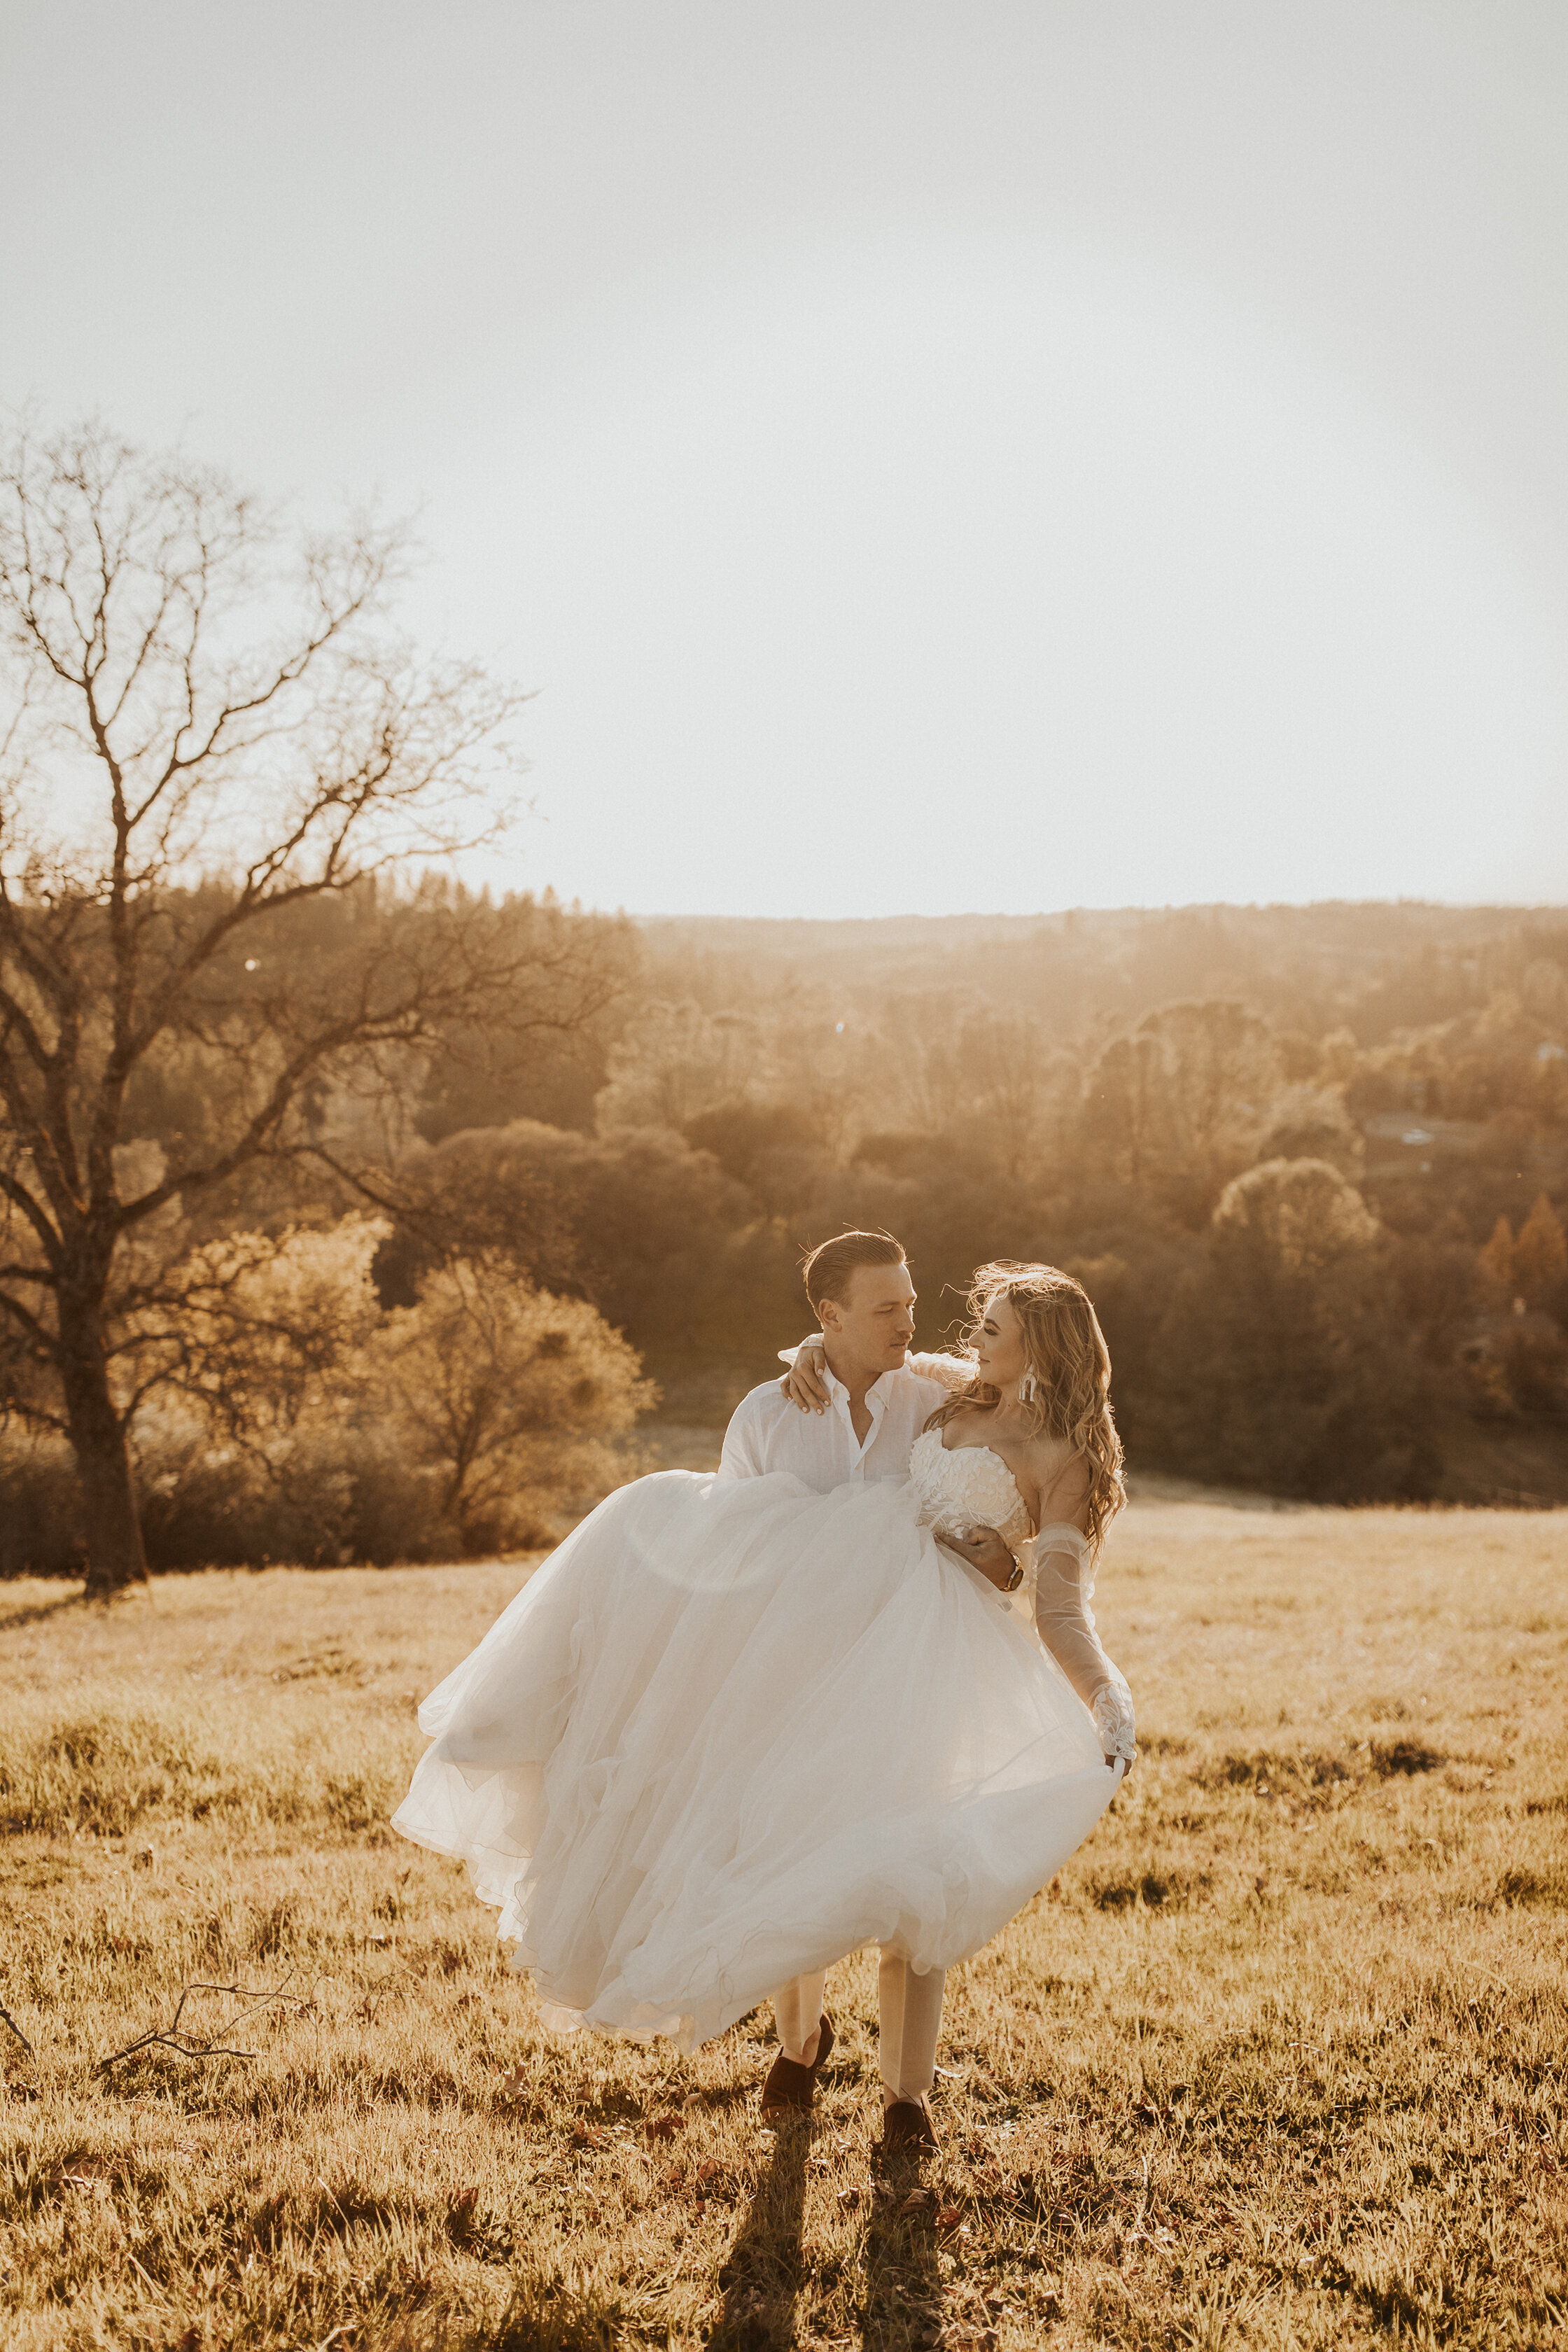  Made with Love Max wedding gown for Bridgerton inspired styled shoot 